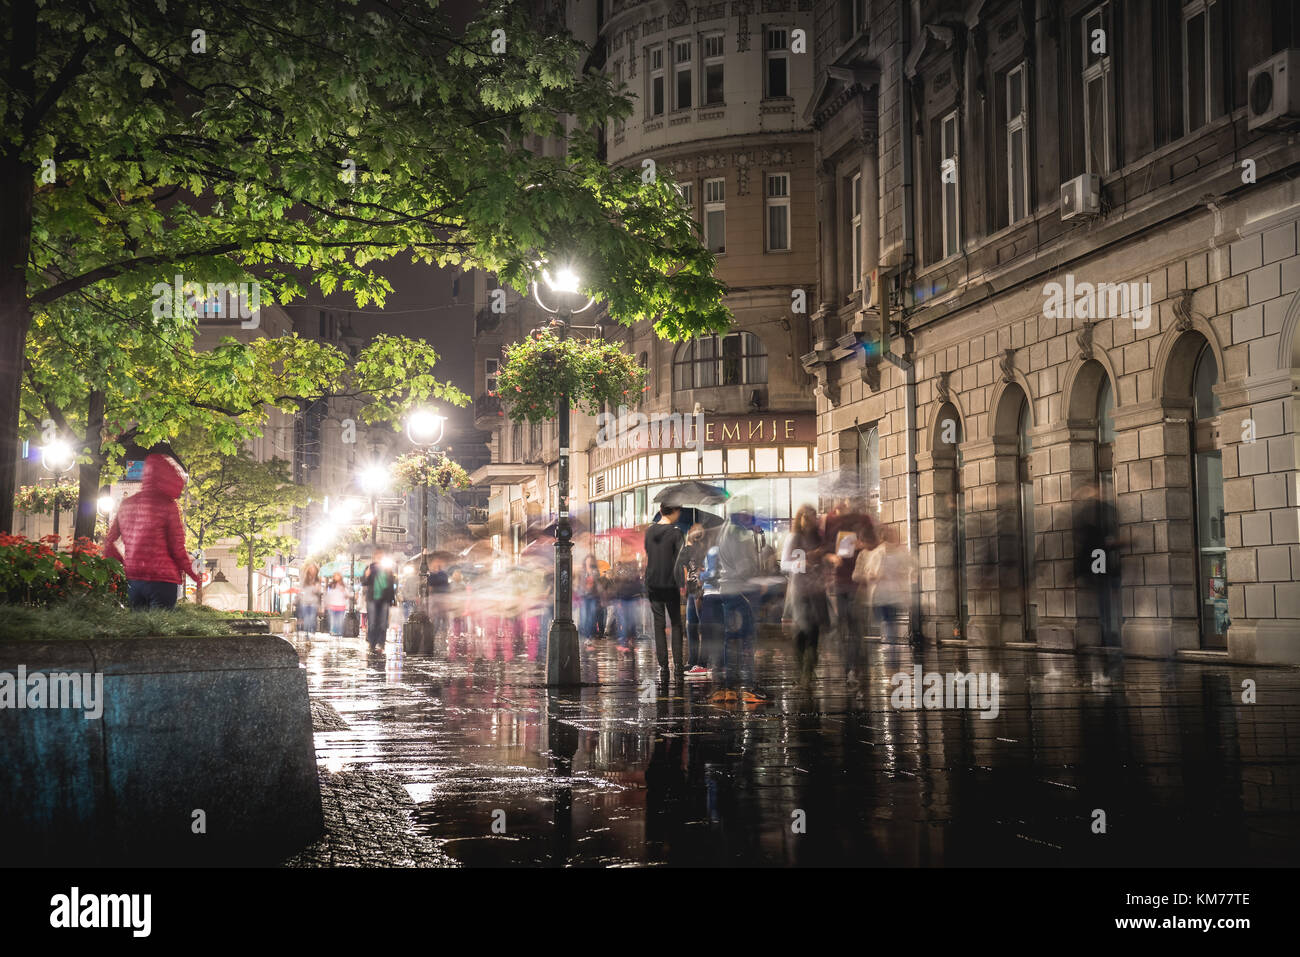 BELGRADE, SERBIA - SEPTEMBER 25: Rainy inght at Knez Mihailova Street on September 25, 2015 in Belgrade, Serbia. Street is the main shopping mile of B Stock Photo